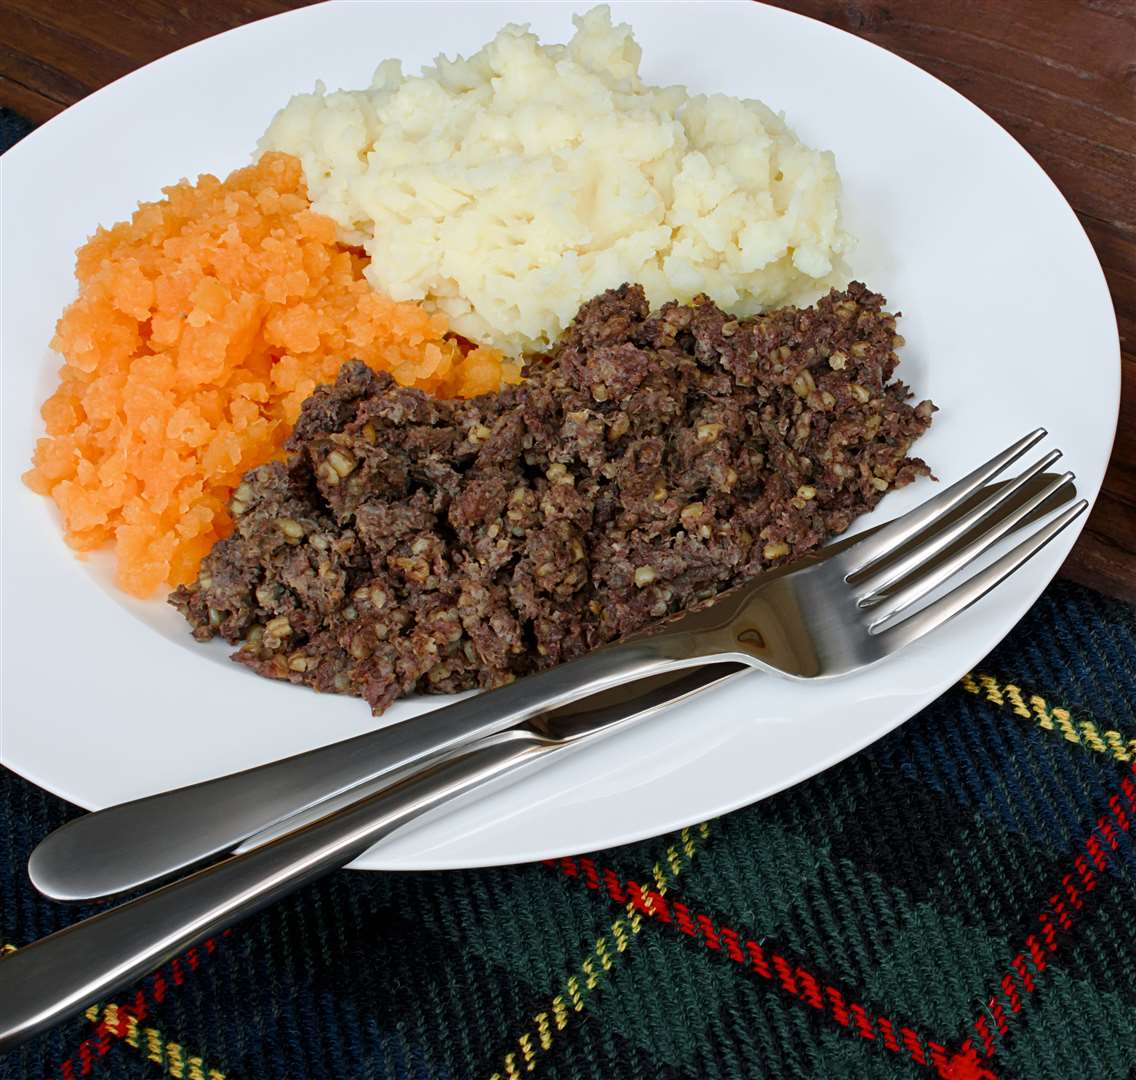 Guests will be able to enjoy haggis, neeps and tatties.